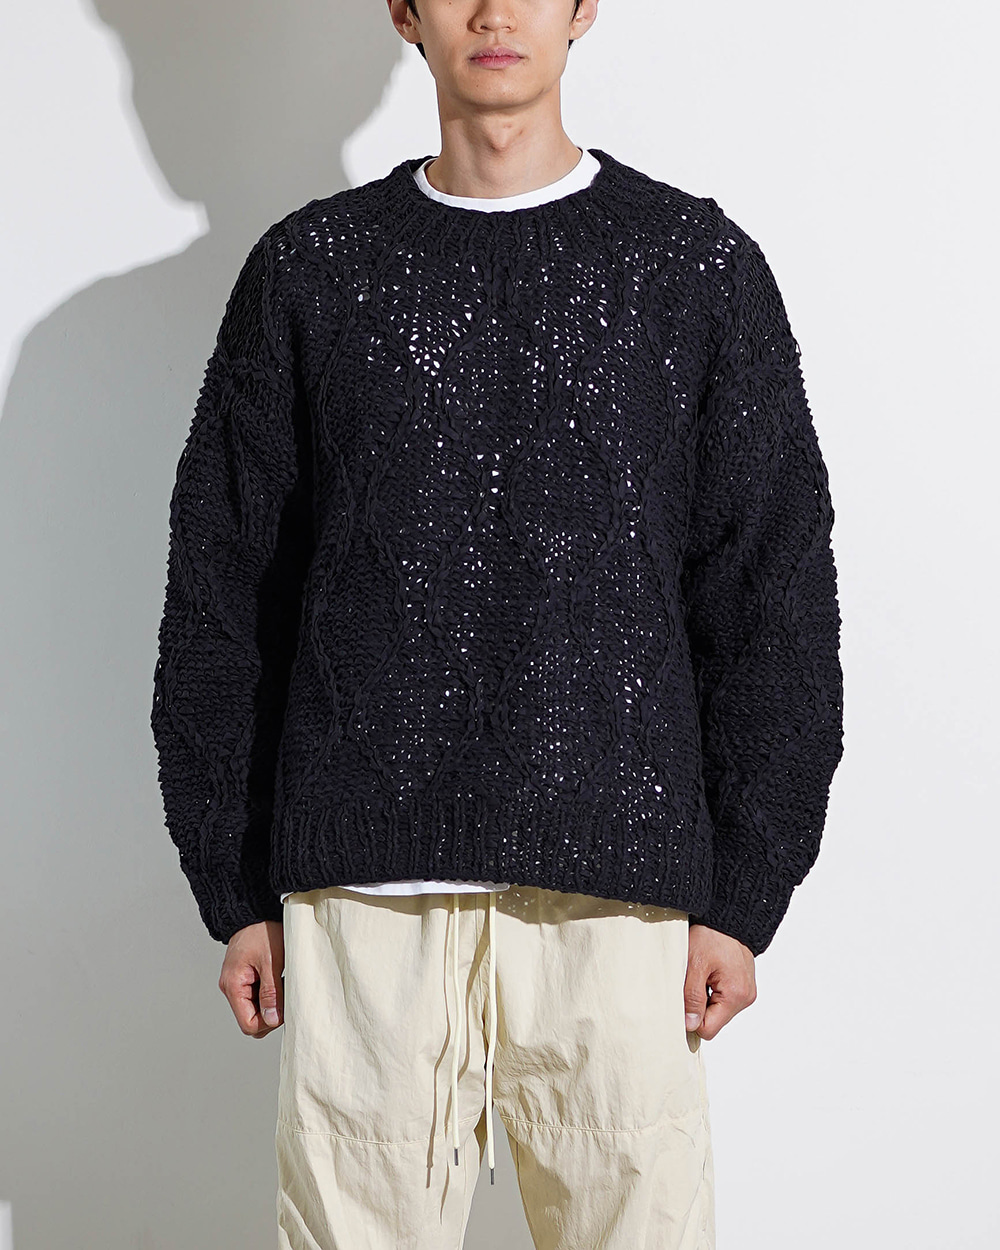 Gourd Pattern Hand-Knitted Crewneck Sweater (Charcoal)